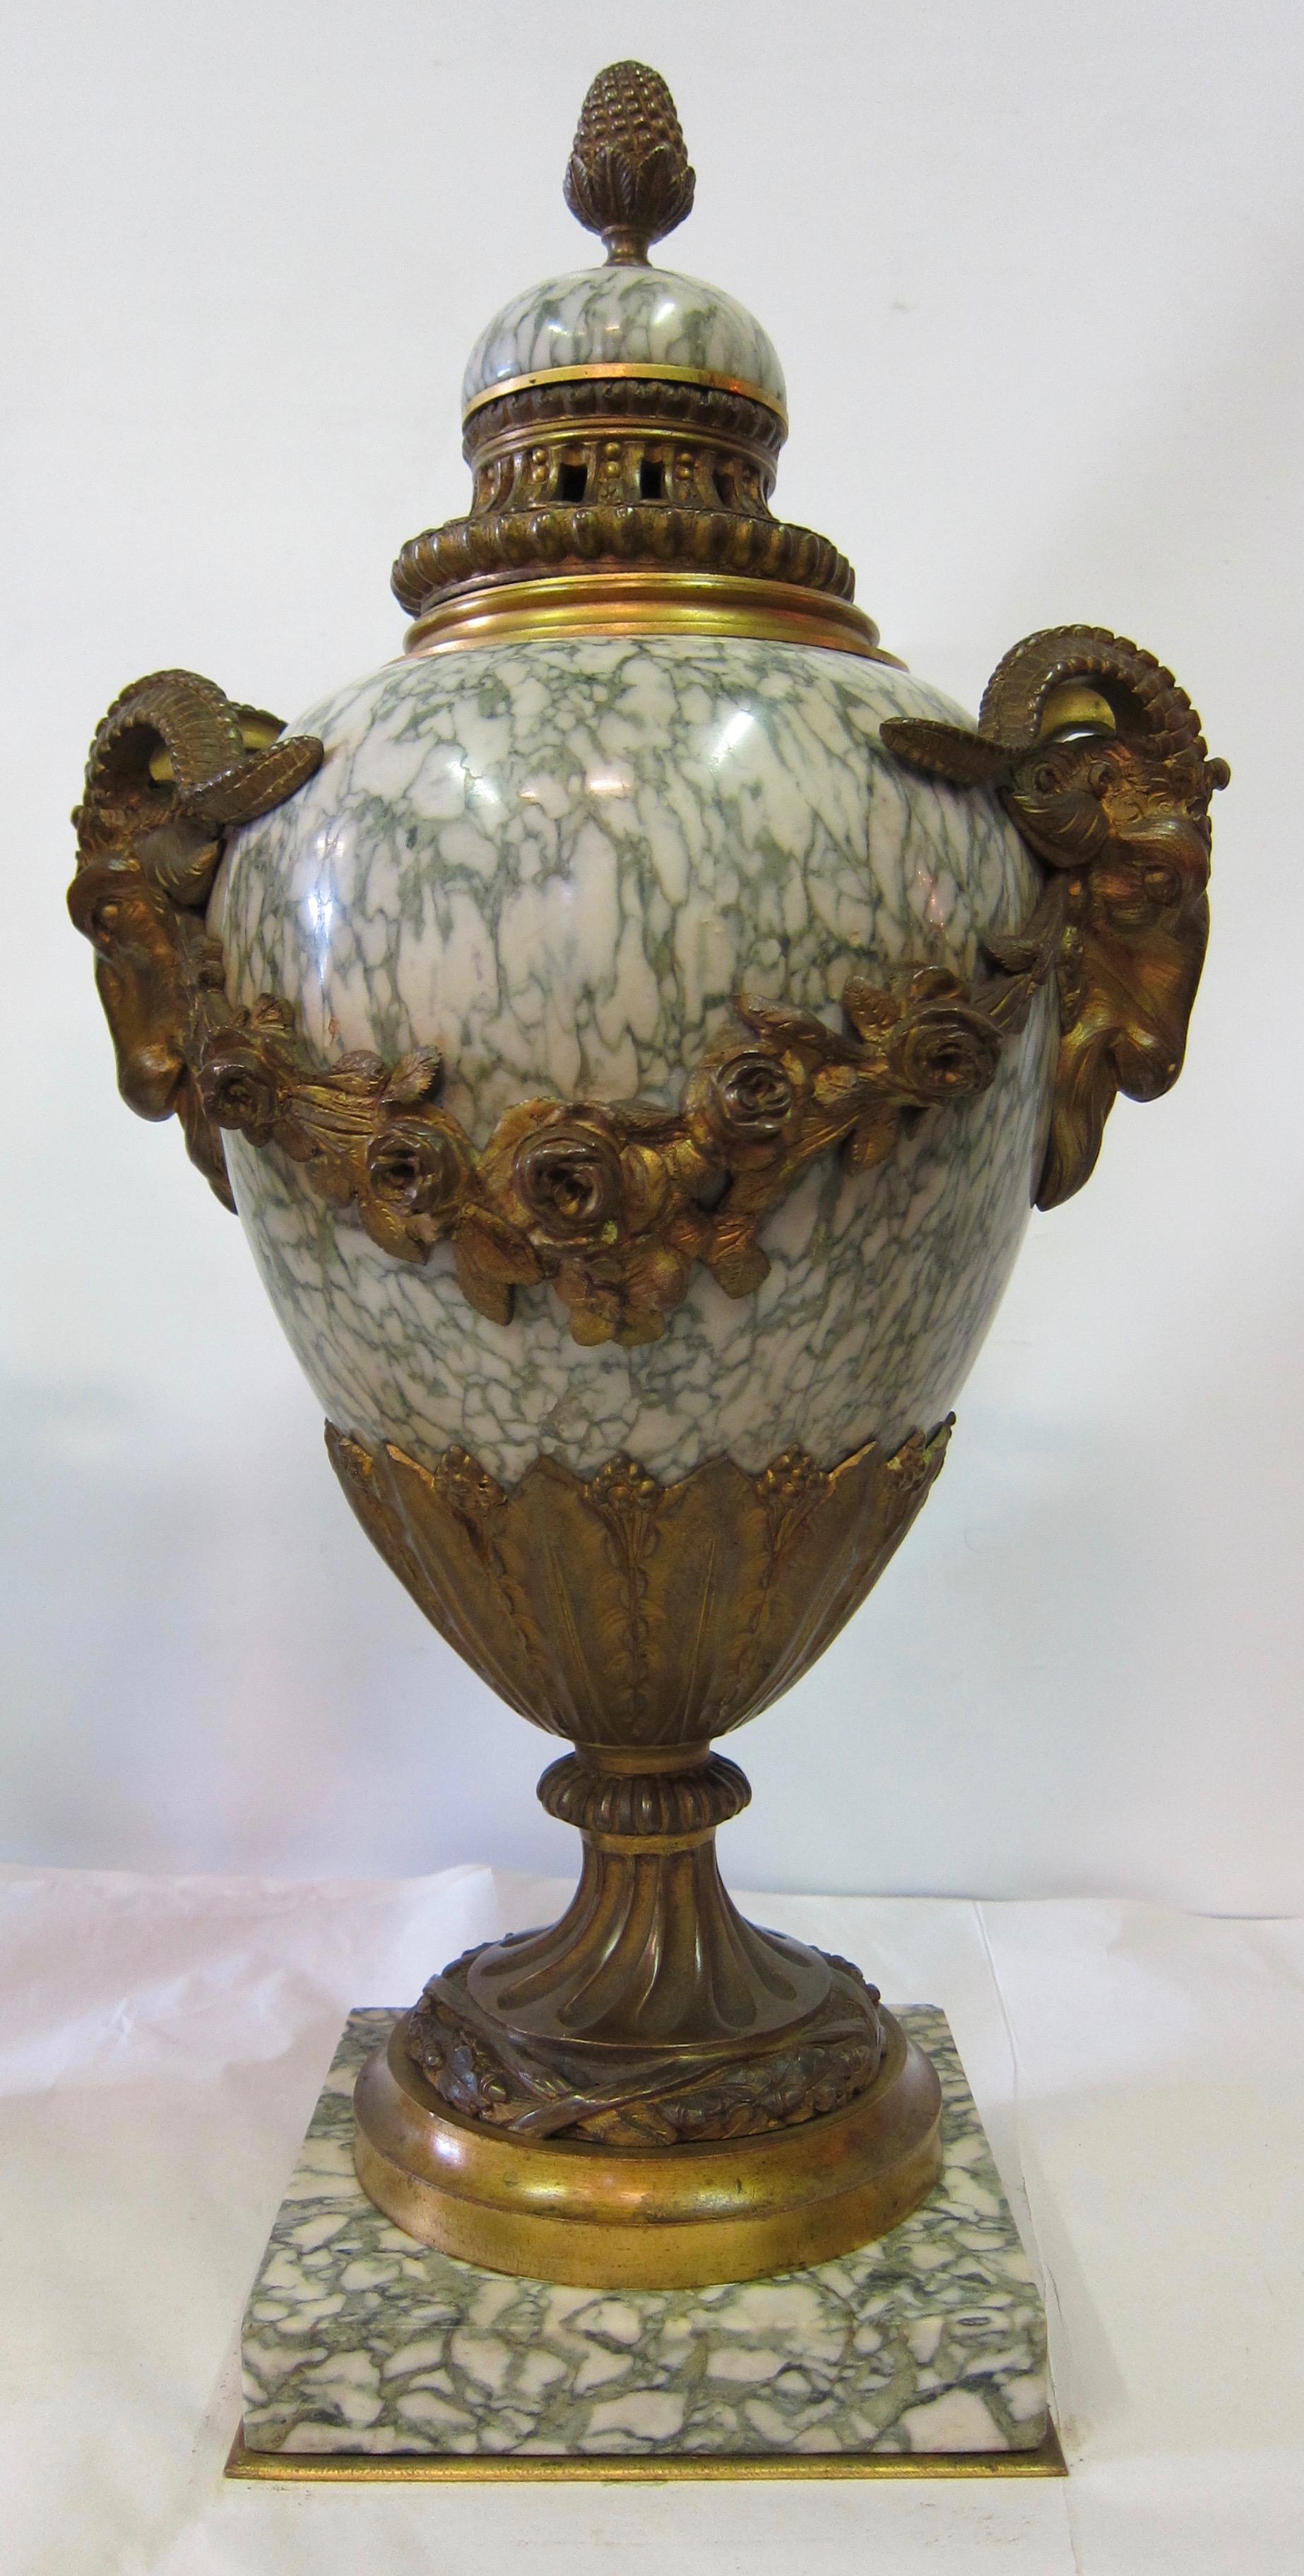 Finely crafted, highly polished Empire style veined green marble sectional baluster form urns. These elegant treasures feature patinated ormolu ram's head handles and are draped with rose garland ormolu swags. Each urn is mounted on a square marble